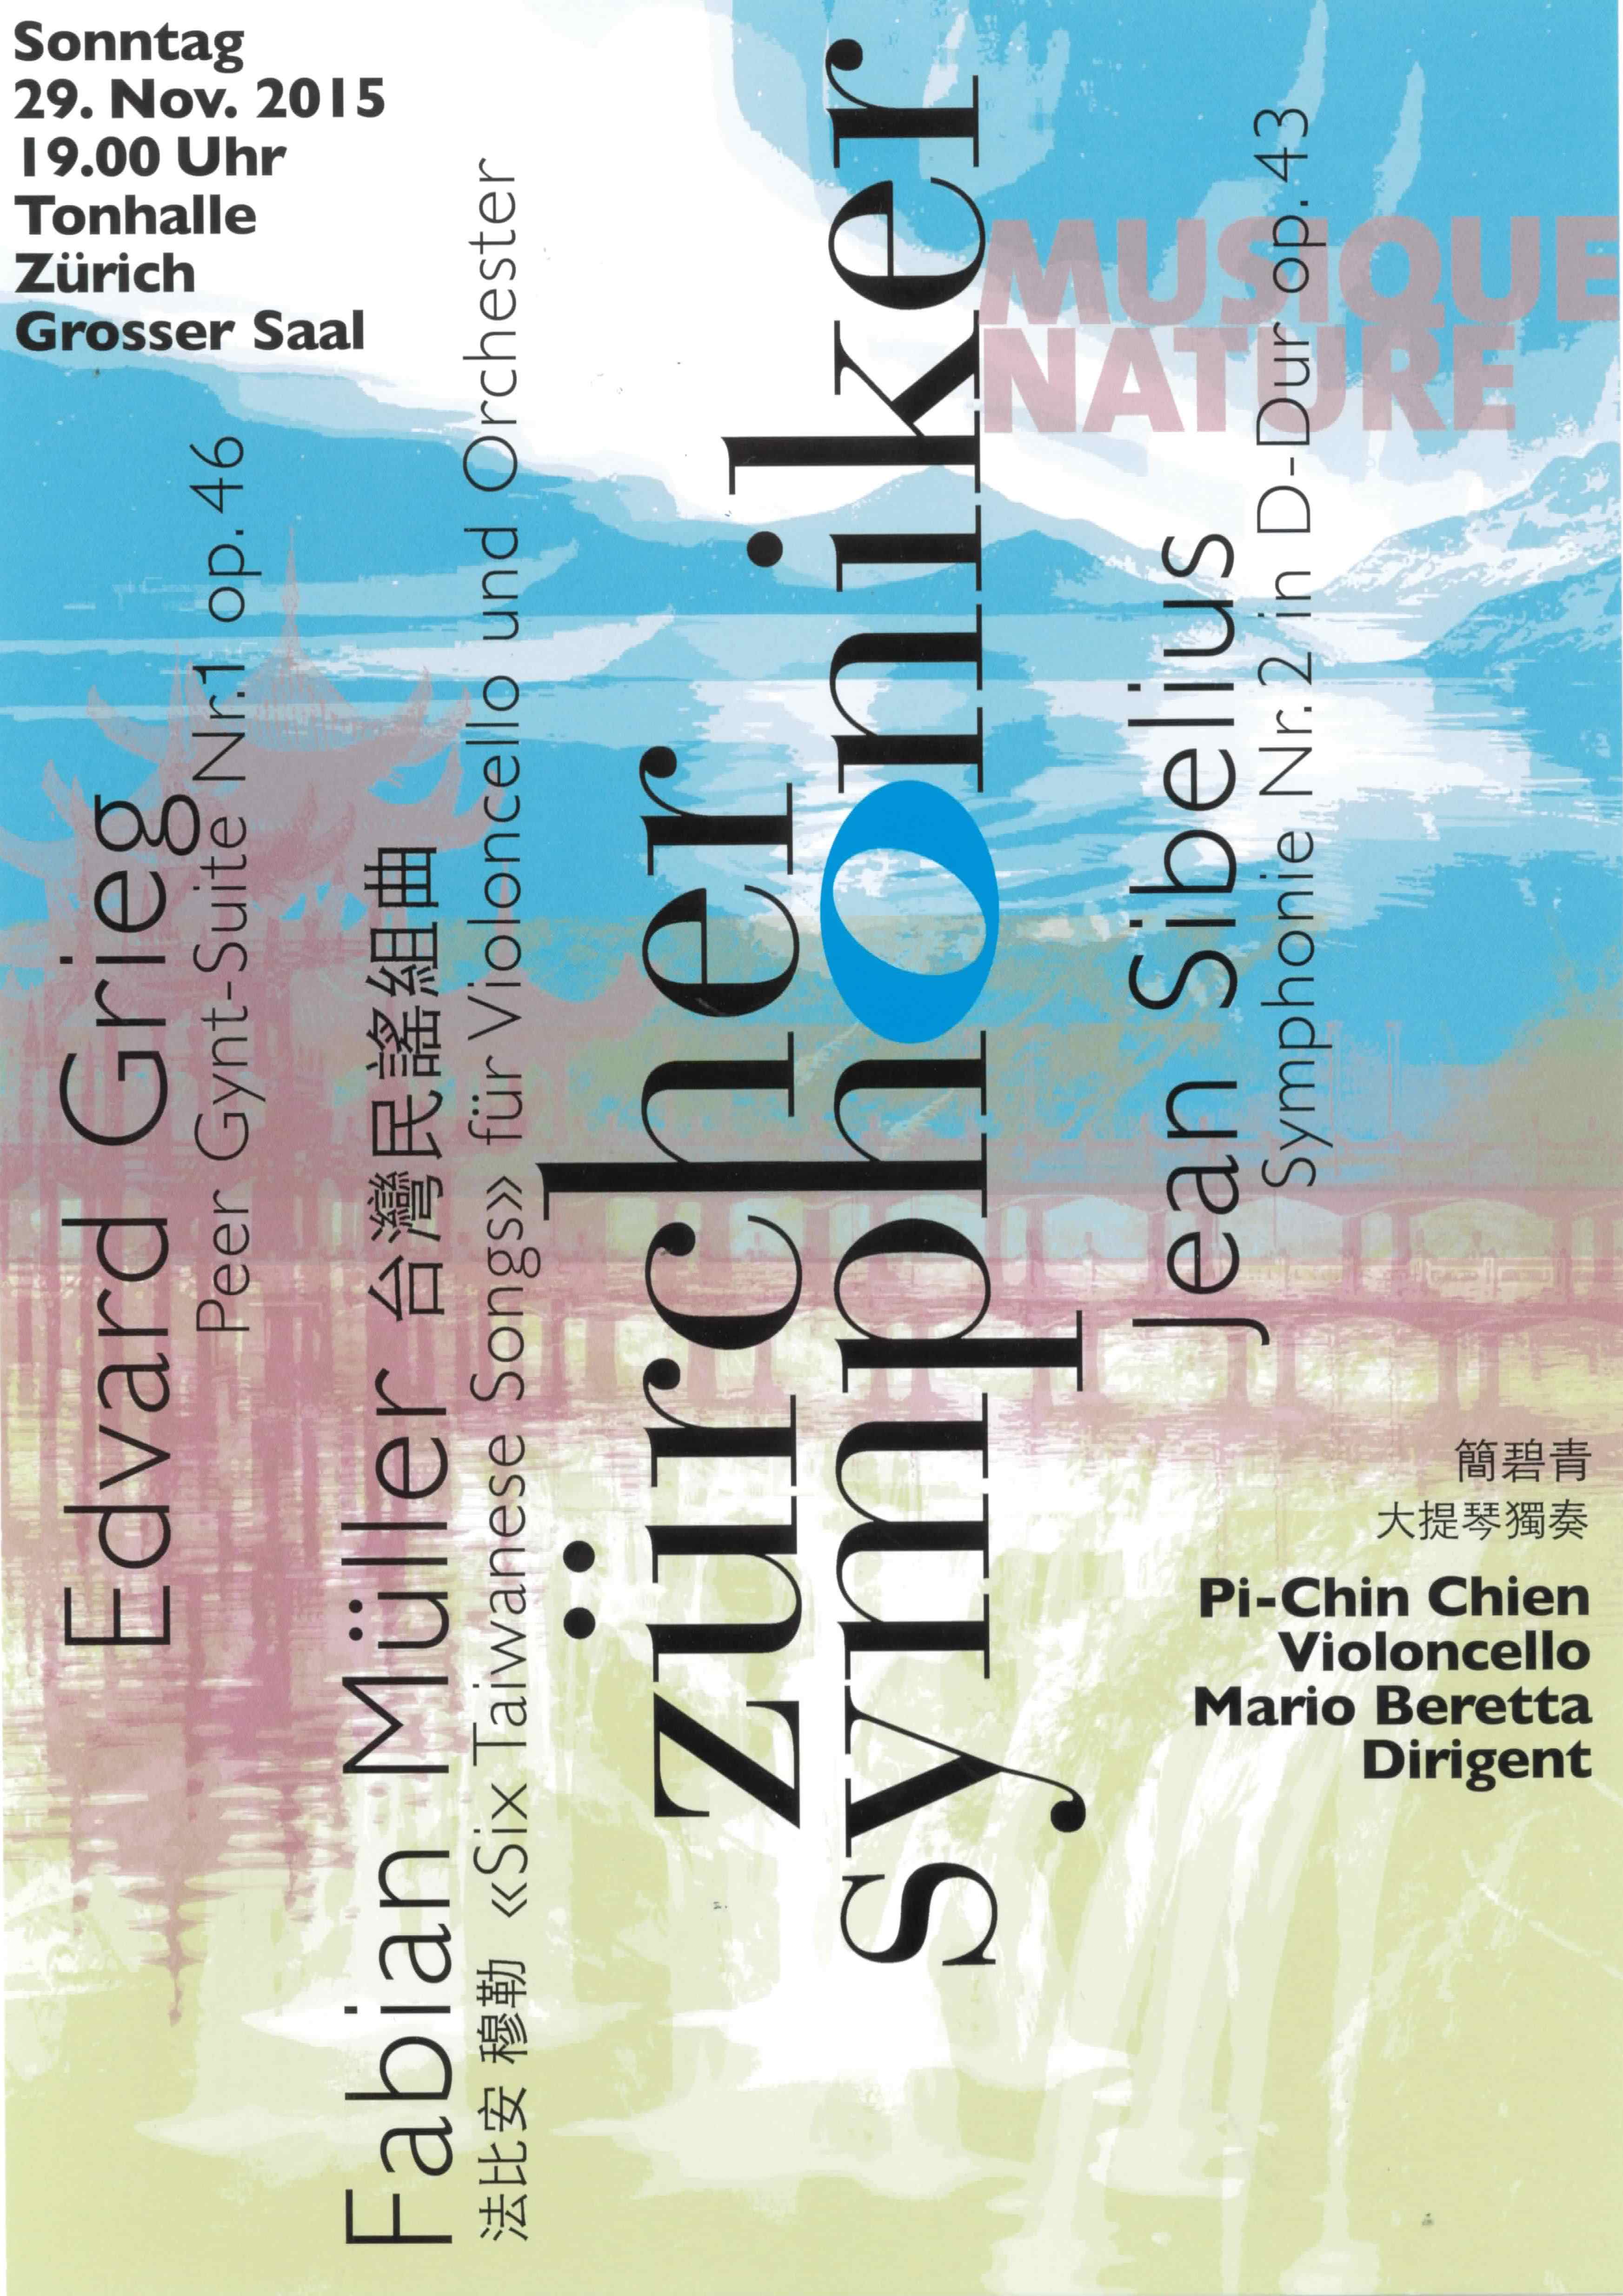 Nov. 29th, 2015 Concert with Taiwanese folk songs will be presented by Taiwanese cellist Pi-Chin Chien at Tonhalle Zurich